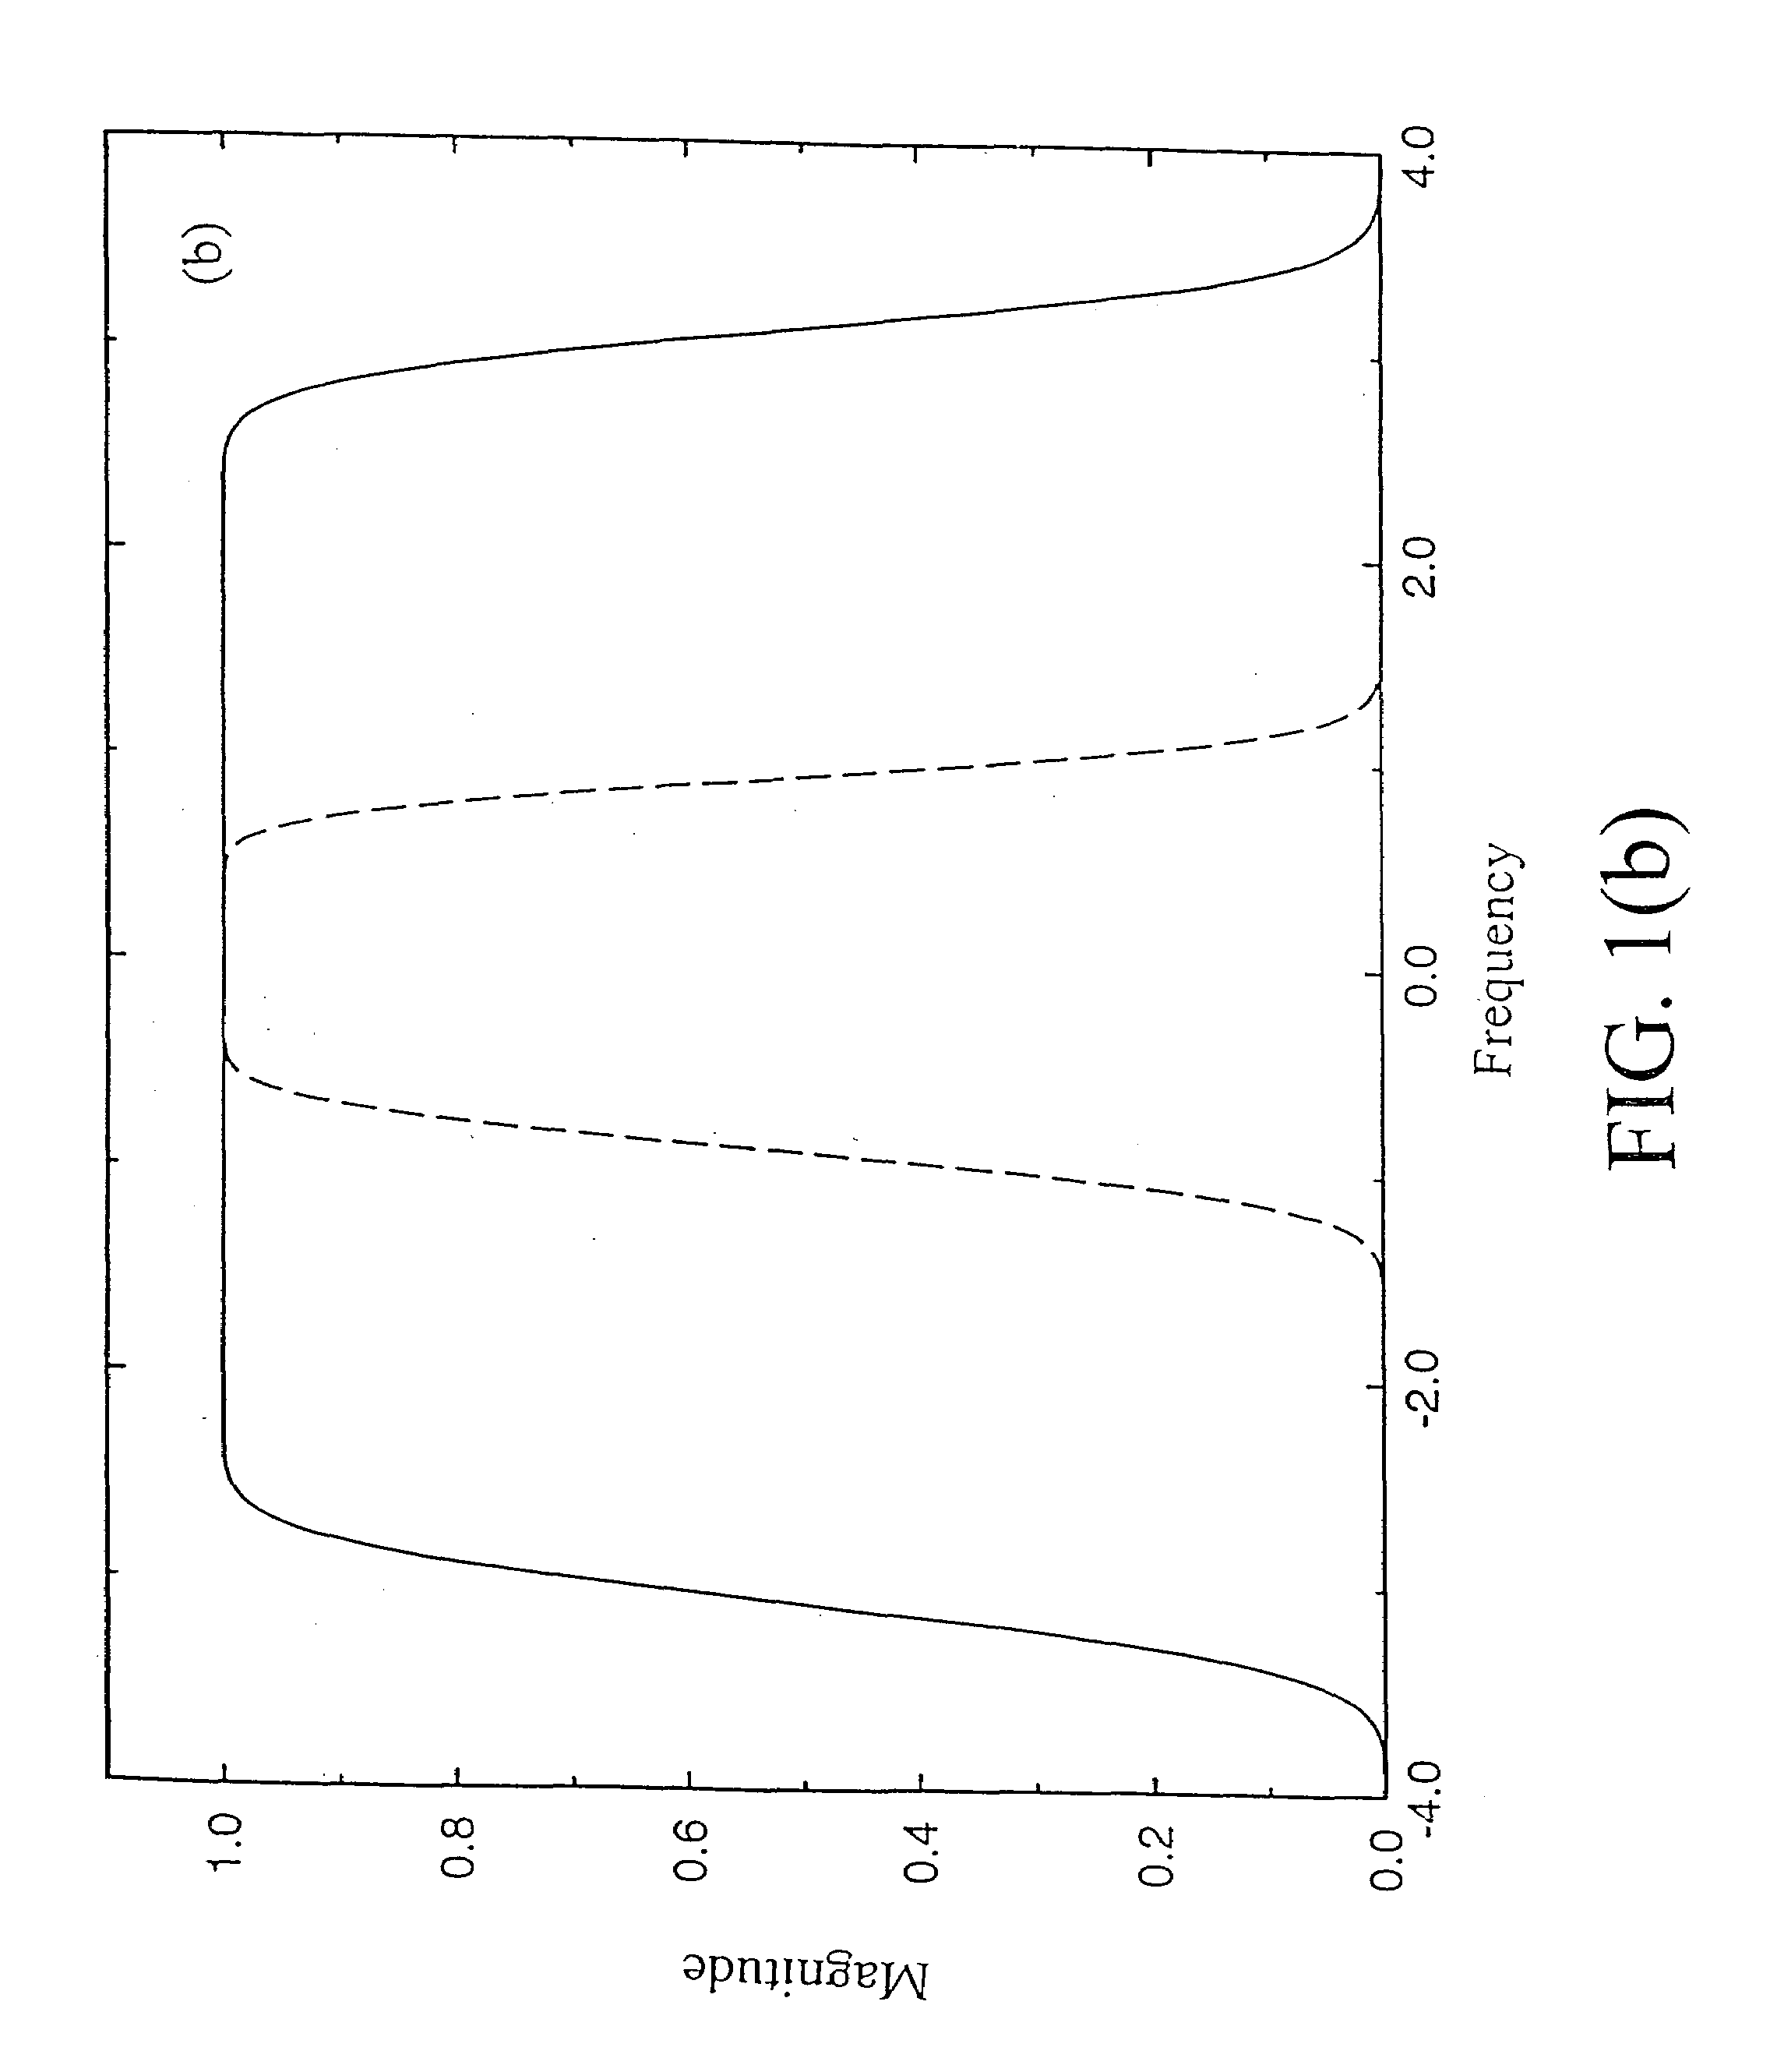 Methods for performing DAF data filtering and padding